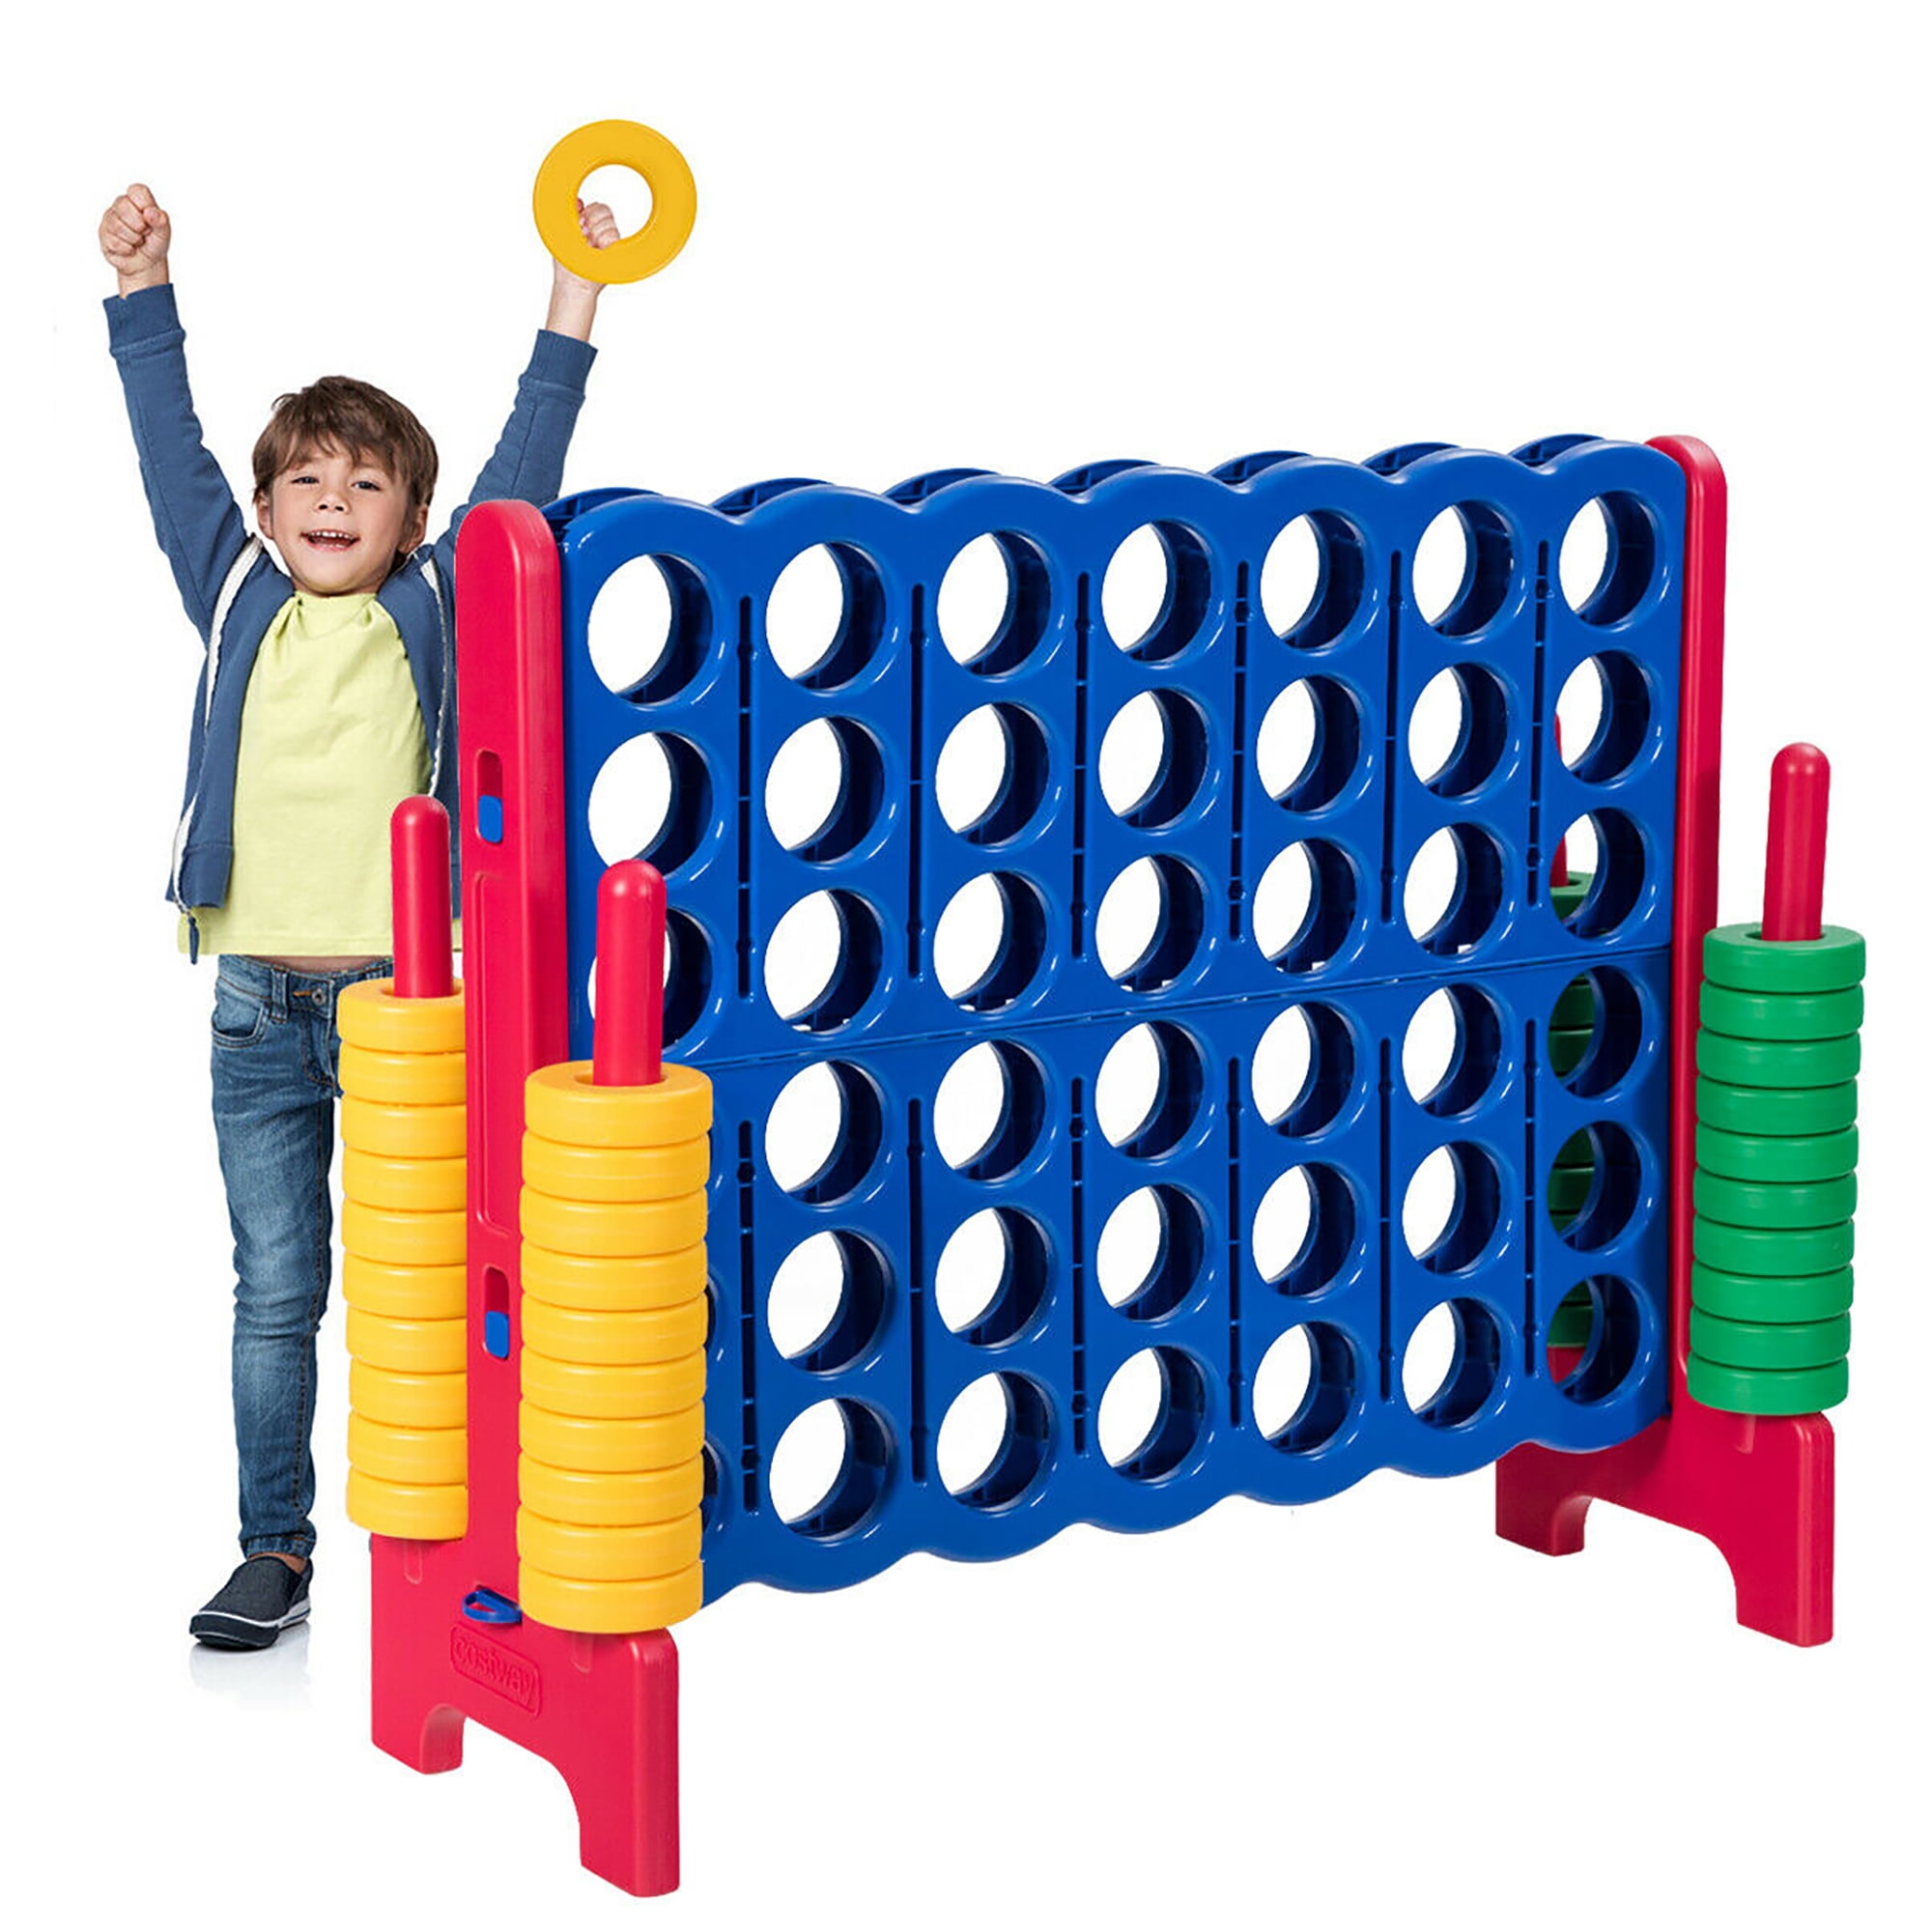 Details about   120cm Kids Jumbo 4-to-Score Giant Game Connect-All-4 Game Set Fun IndoorToy Blue 